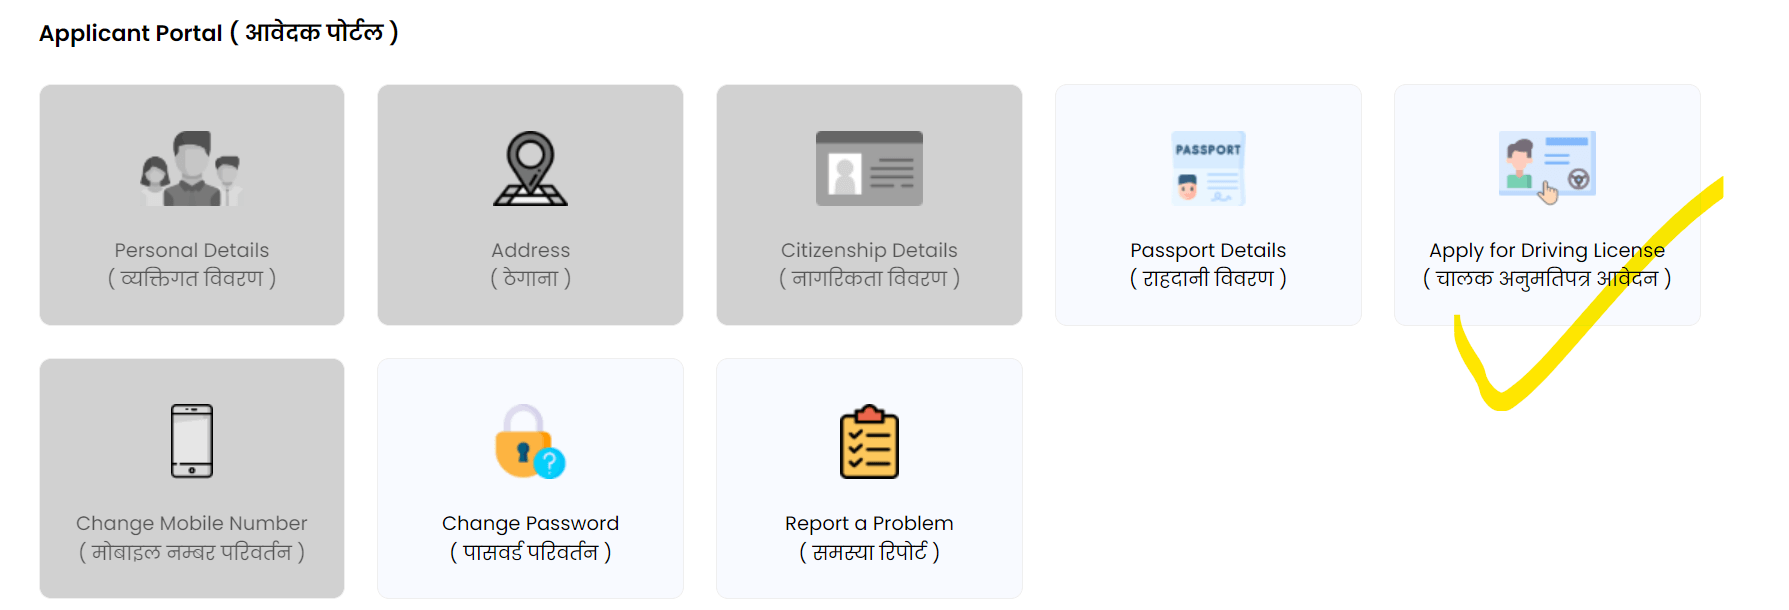 Online Driving License Nepal | How to Fill Online Form & Check Status